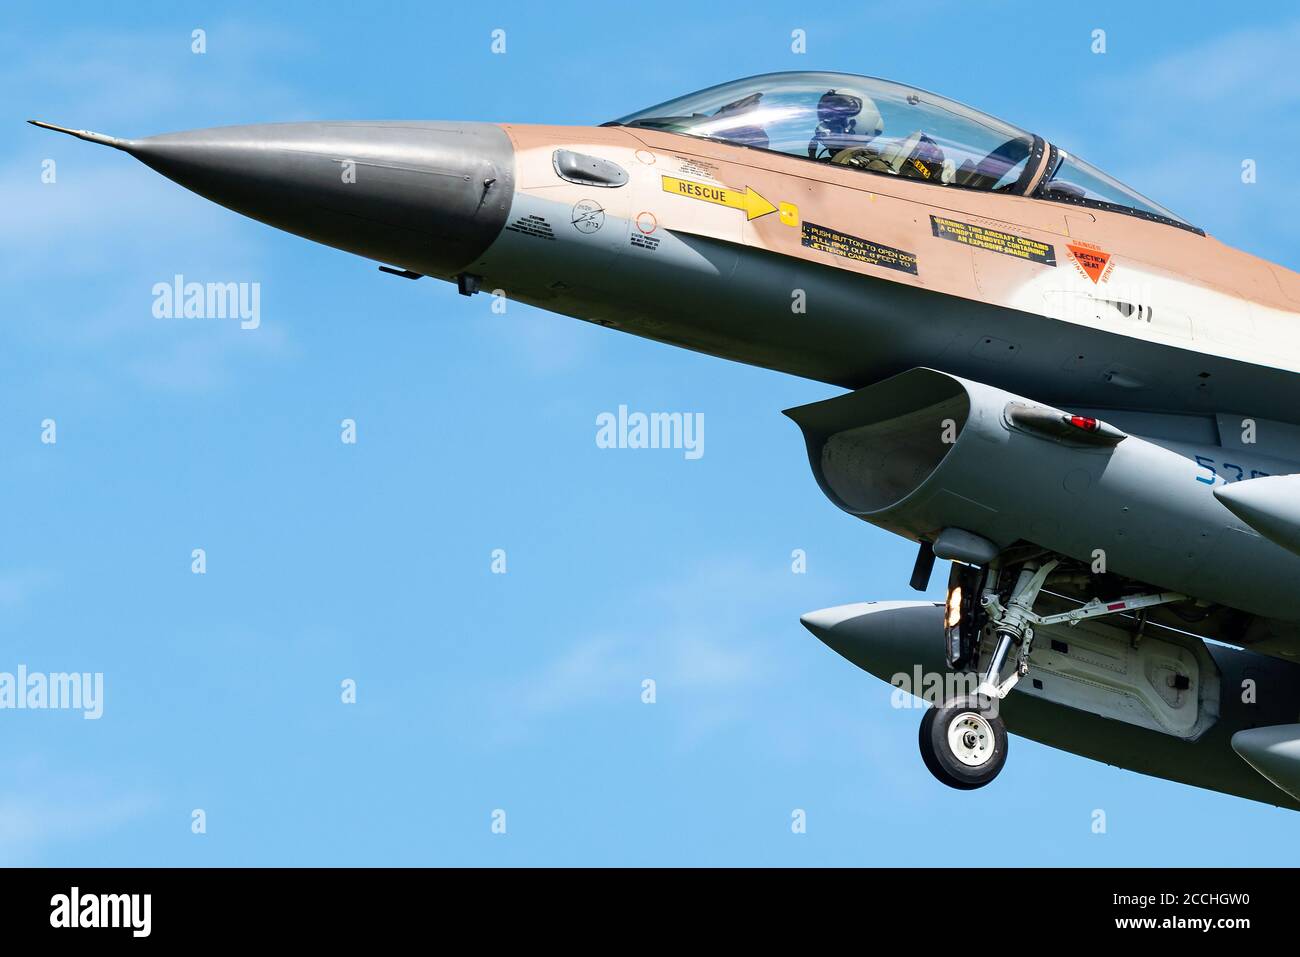 Nörvenich, Germany, August 20, 2020: An Israeli Air Force F-16 'Barak' fighter jet taking off from the Nörvenich Air Base in Germany. Stock Photo